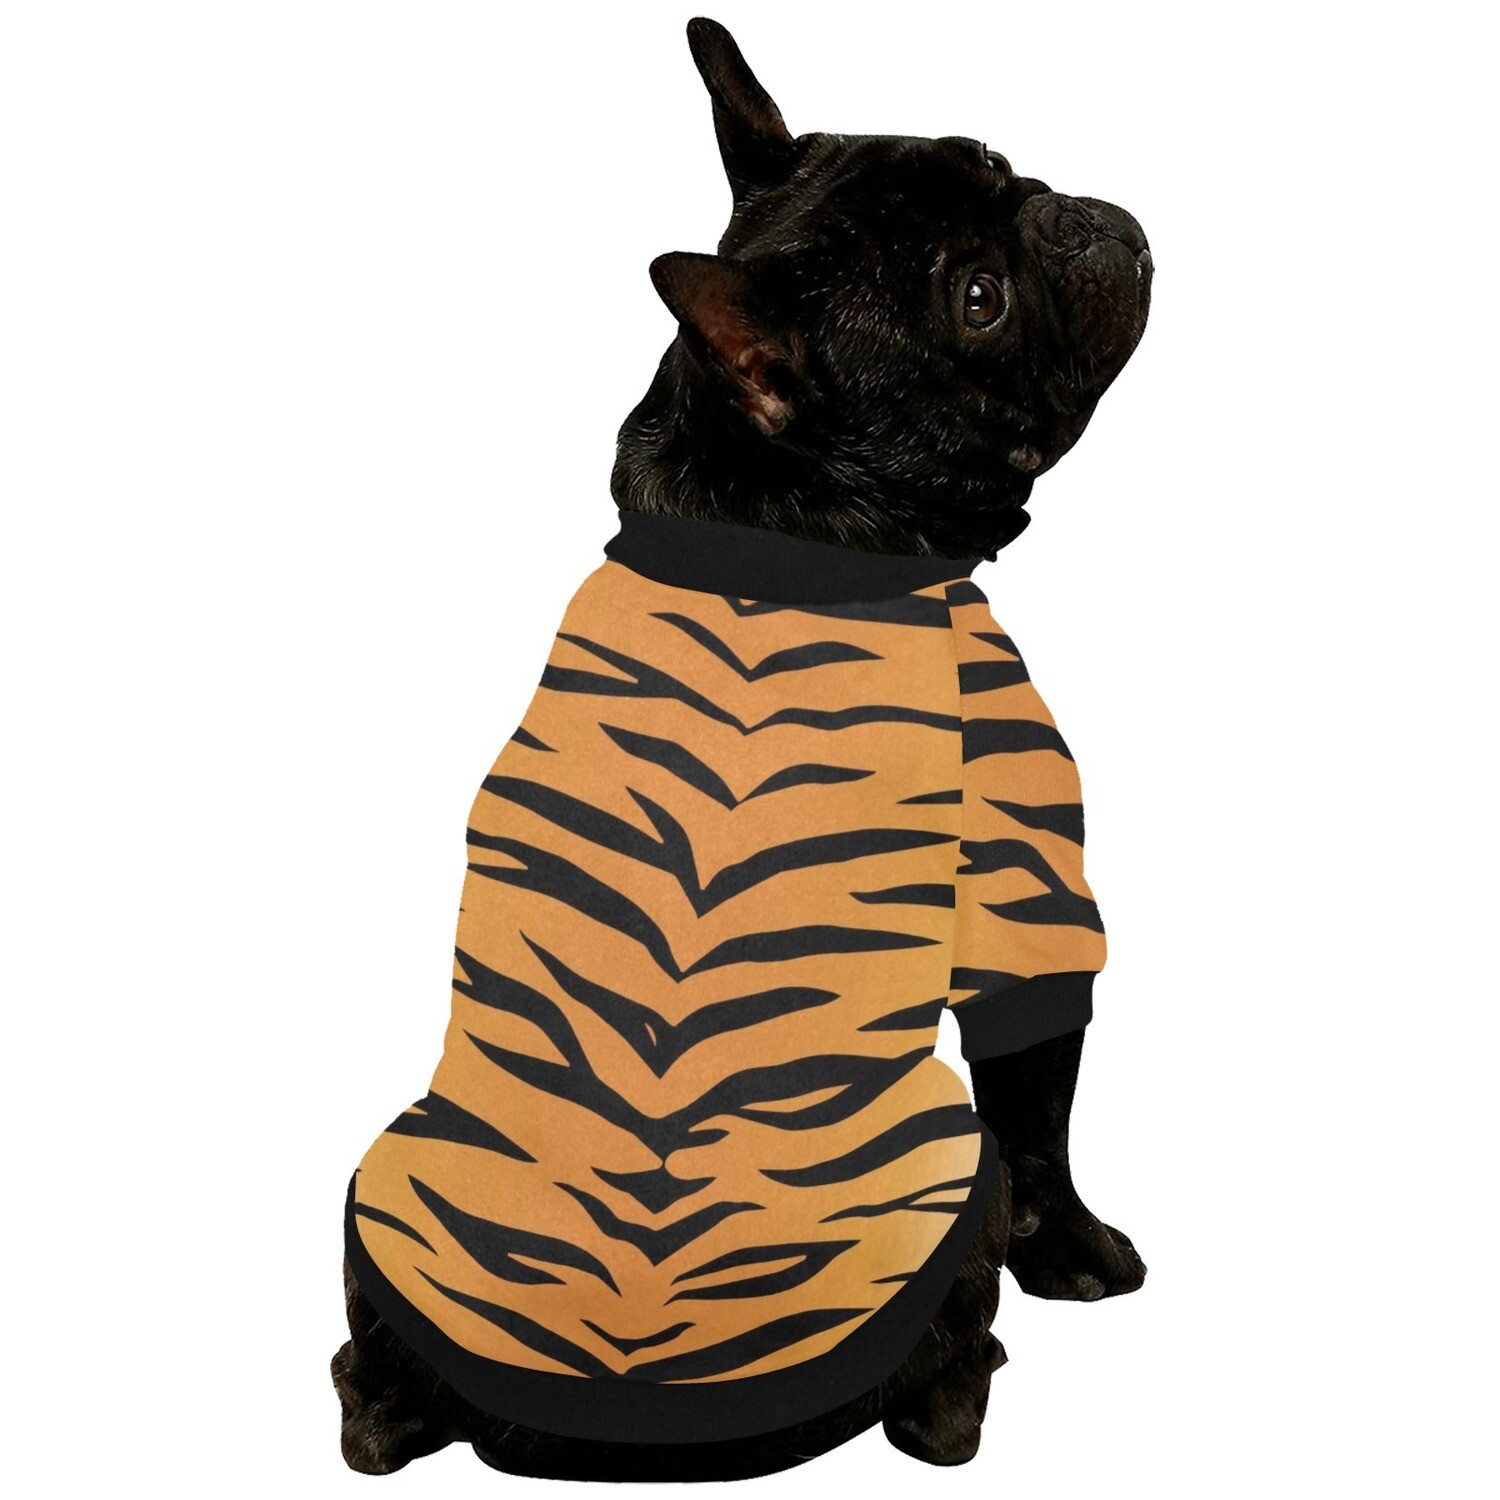 🐕🐅 Fuzzy warm buttoned dog sweatshirt Tiger print, Tigers, dog sweater, Dog clothes, Dog clothing, Dog apparel, Gift for dogs, Halloween